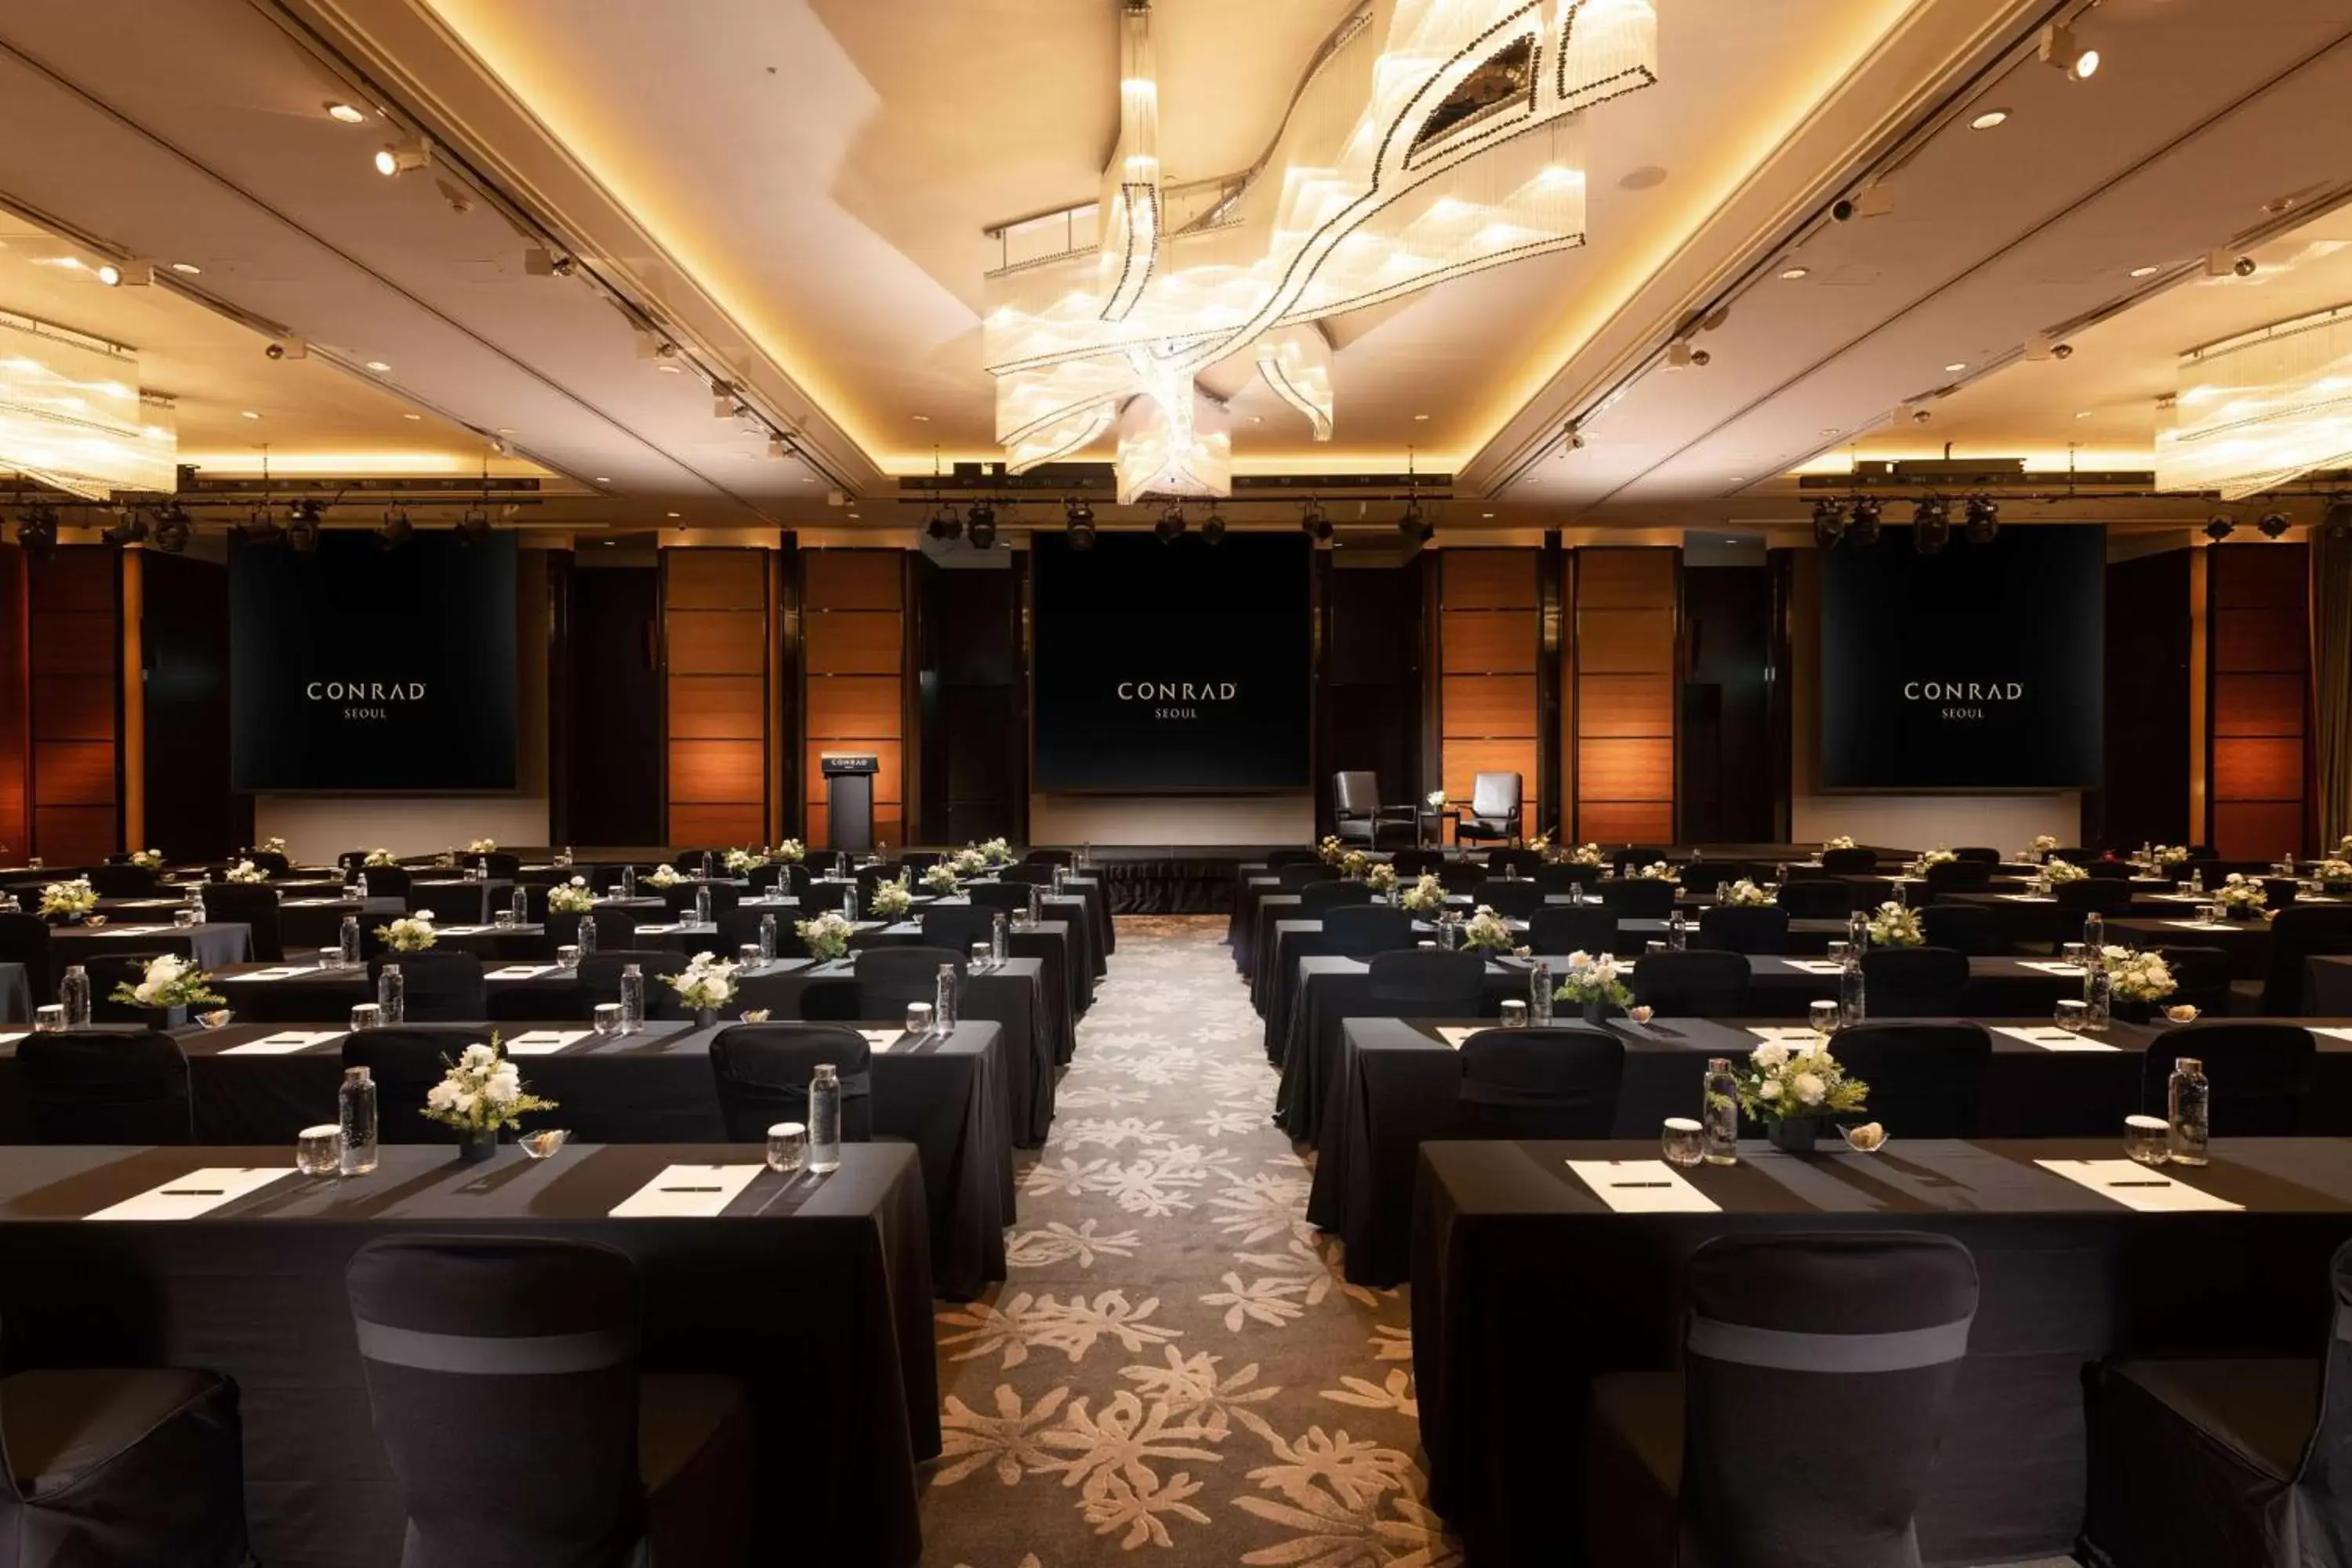 Meeting/conference room in Conrad Seoul